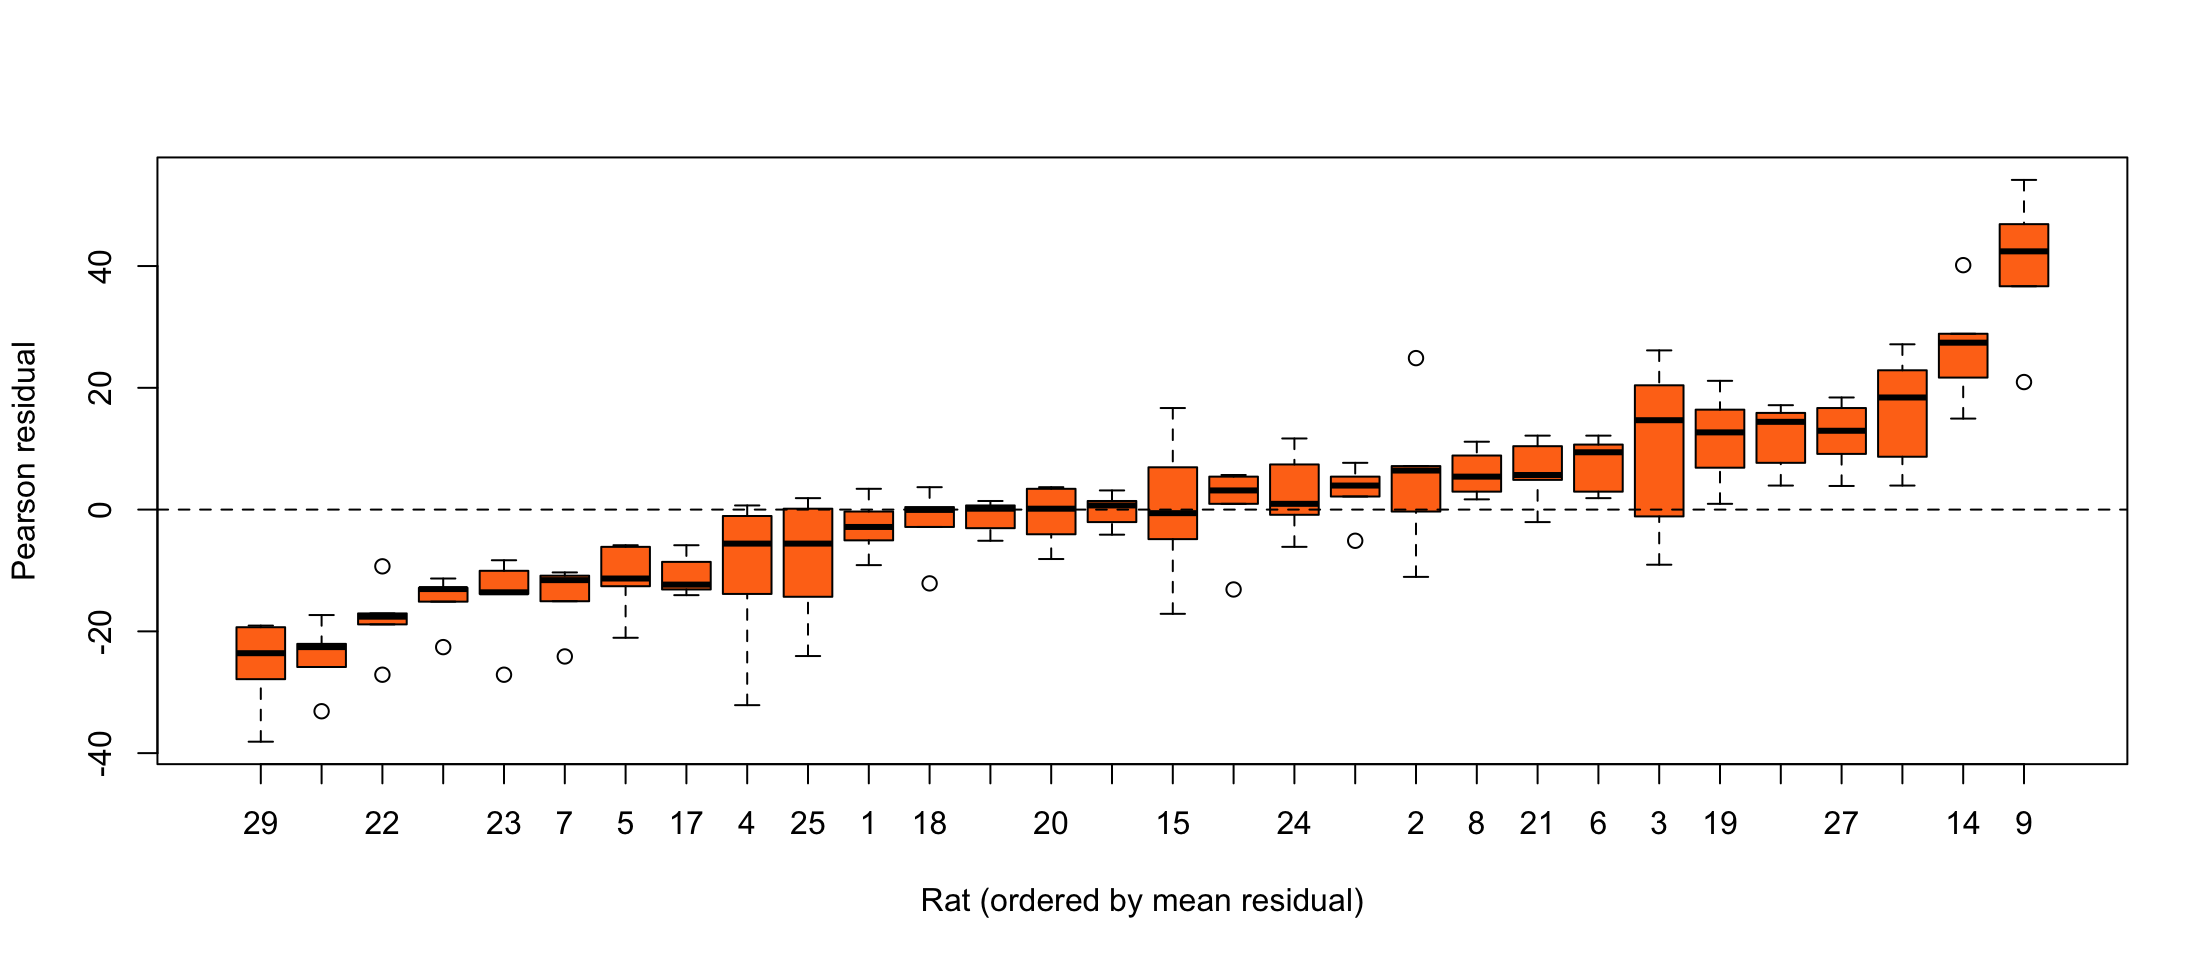 Boxplots of residuals from a simple linear regression, for each rat in the rat growth` data.